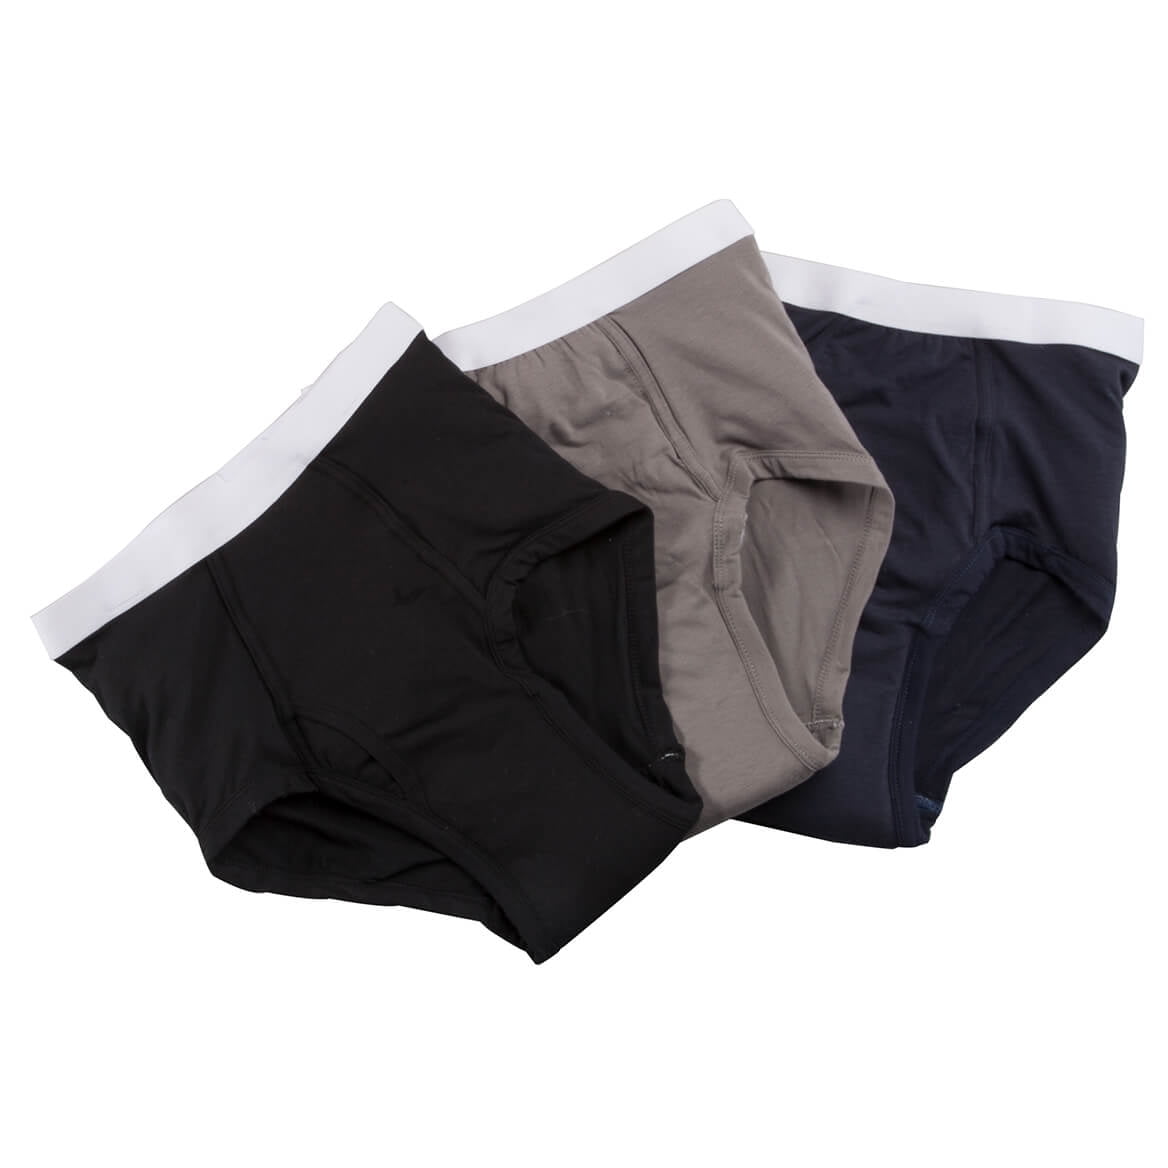 SUPPORT PLUS Womens Incontinence Underwear Washable Reusable 20 oz. Color 3  Pack